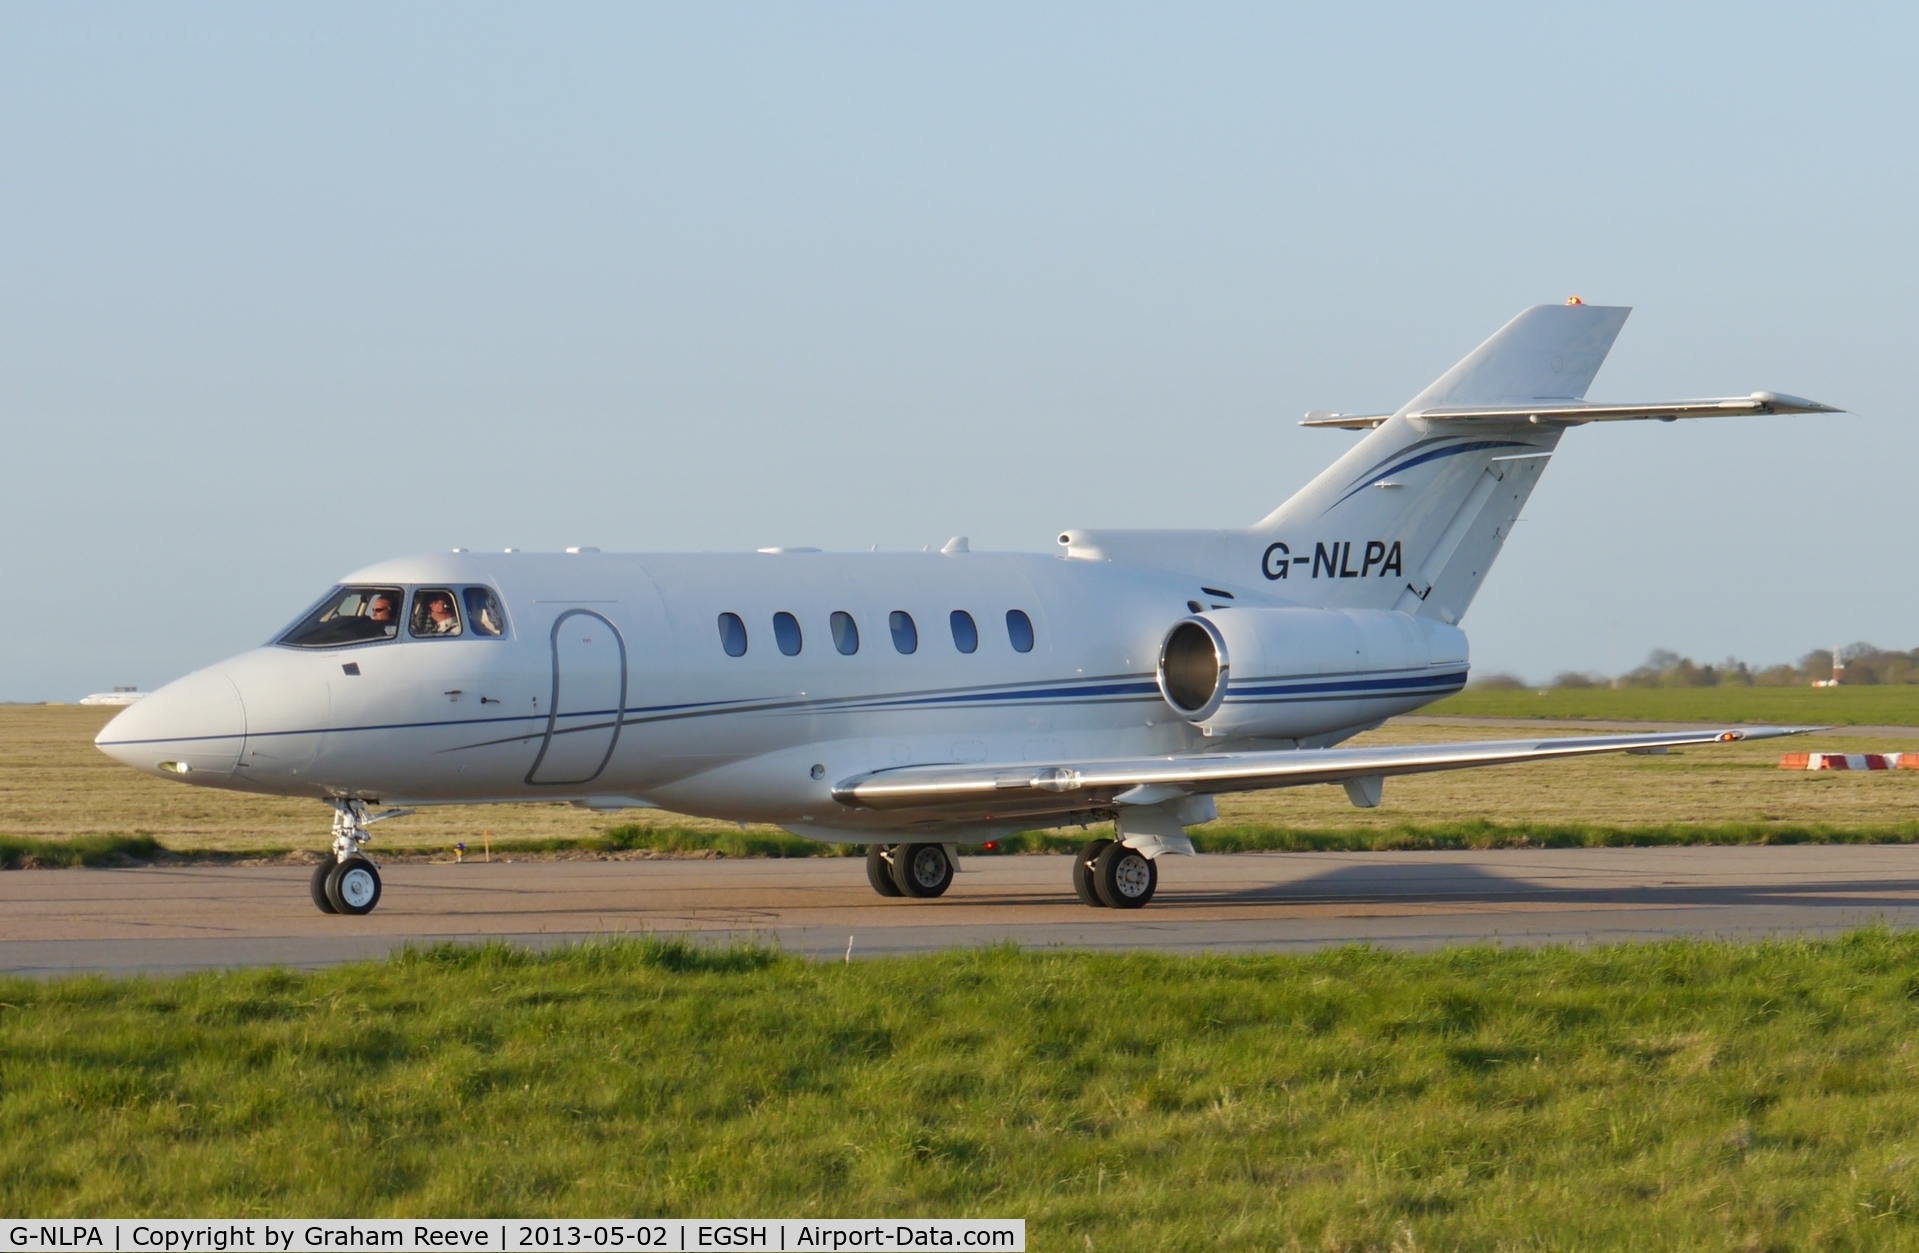 G-NLPA, 2008 Hawker 750 C/N HB-14, Just landed at Norwich.